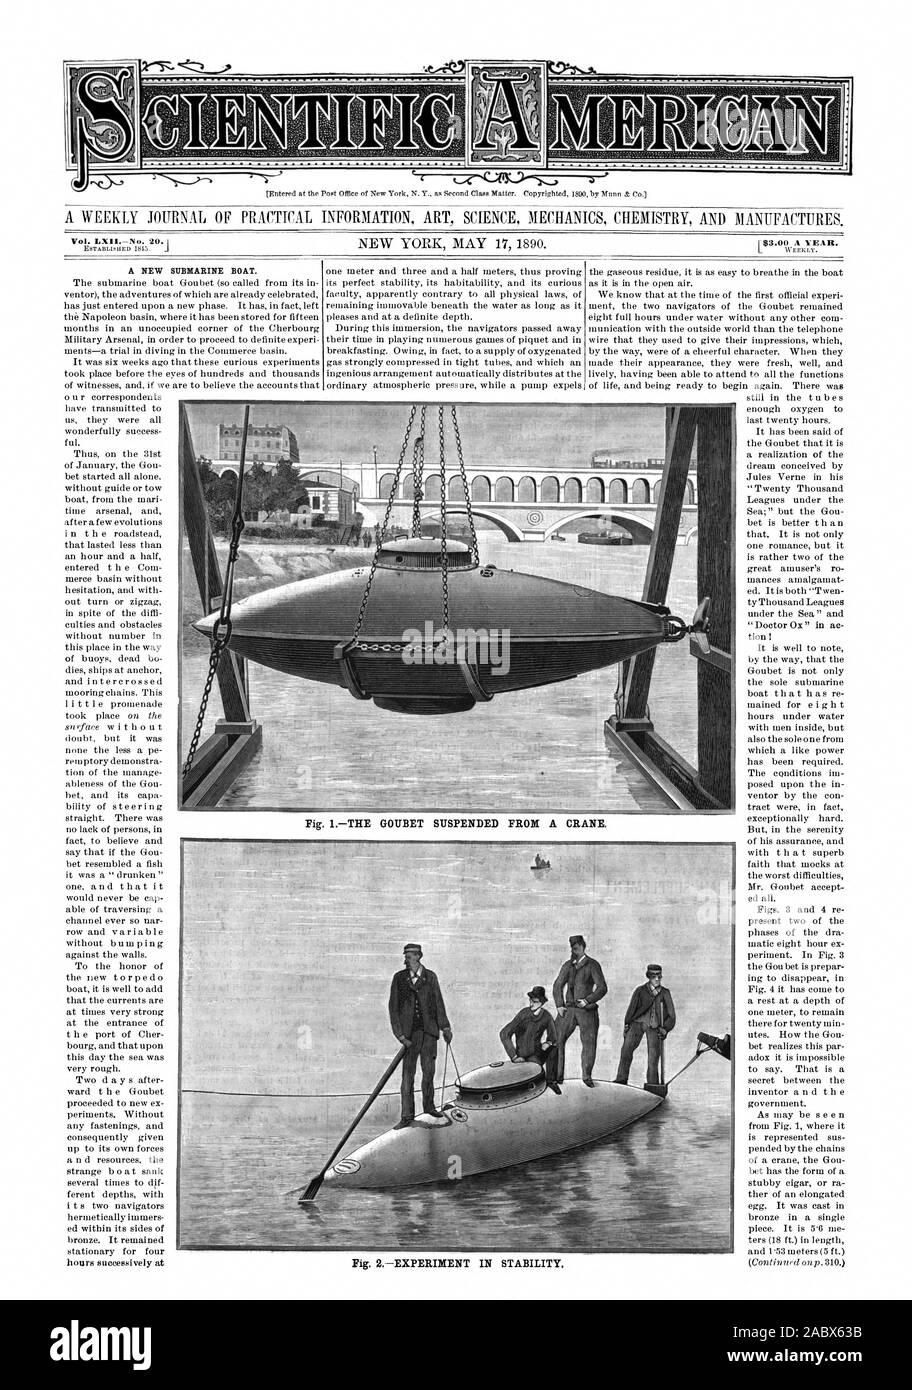 A NEW SUBMARINE BOAT. Fig. ITHE GOUBET SUSPENDED FROM A CRANE. Fig. 2EXPERIMENT IN STABILITY, scientific american, 1890-05-17 Stock Photo